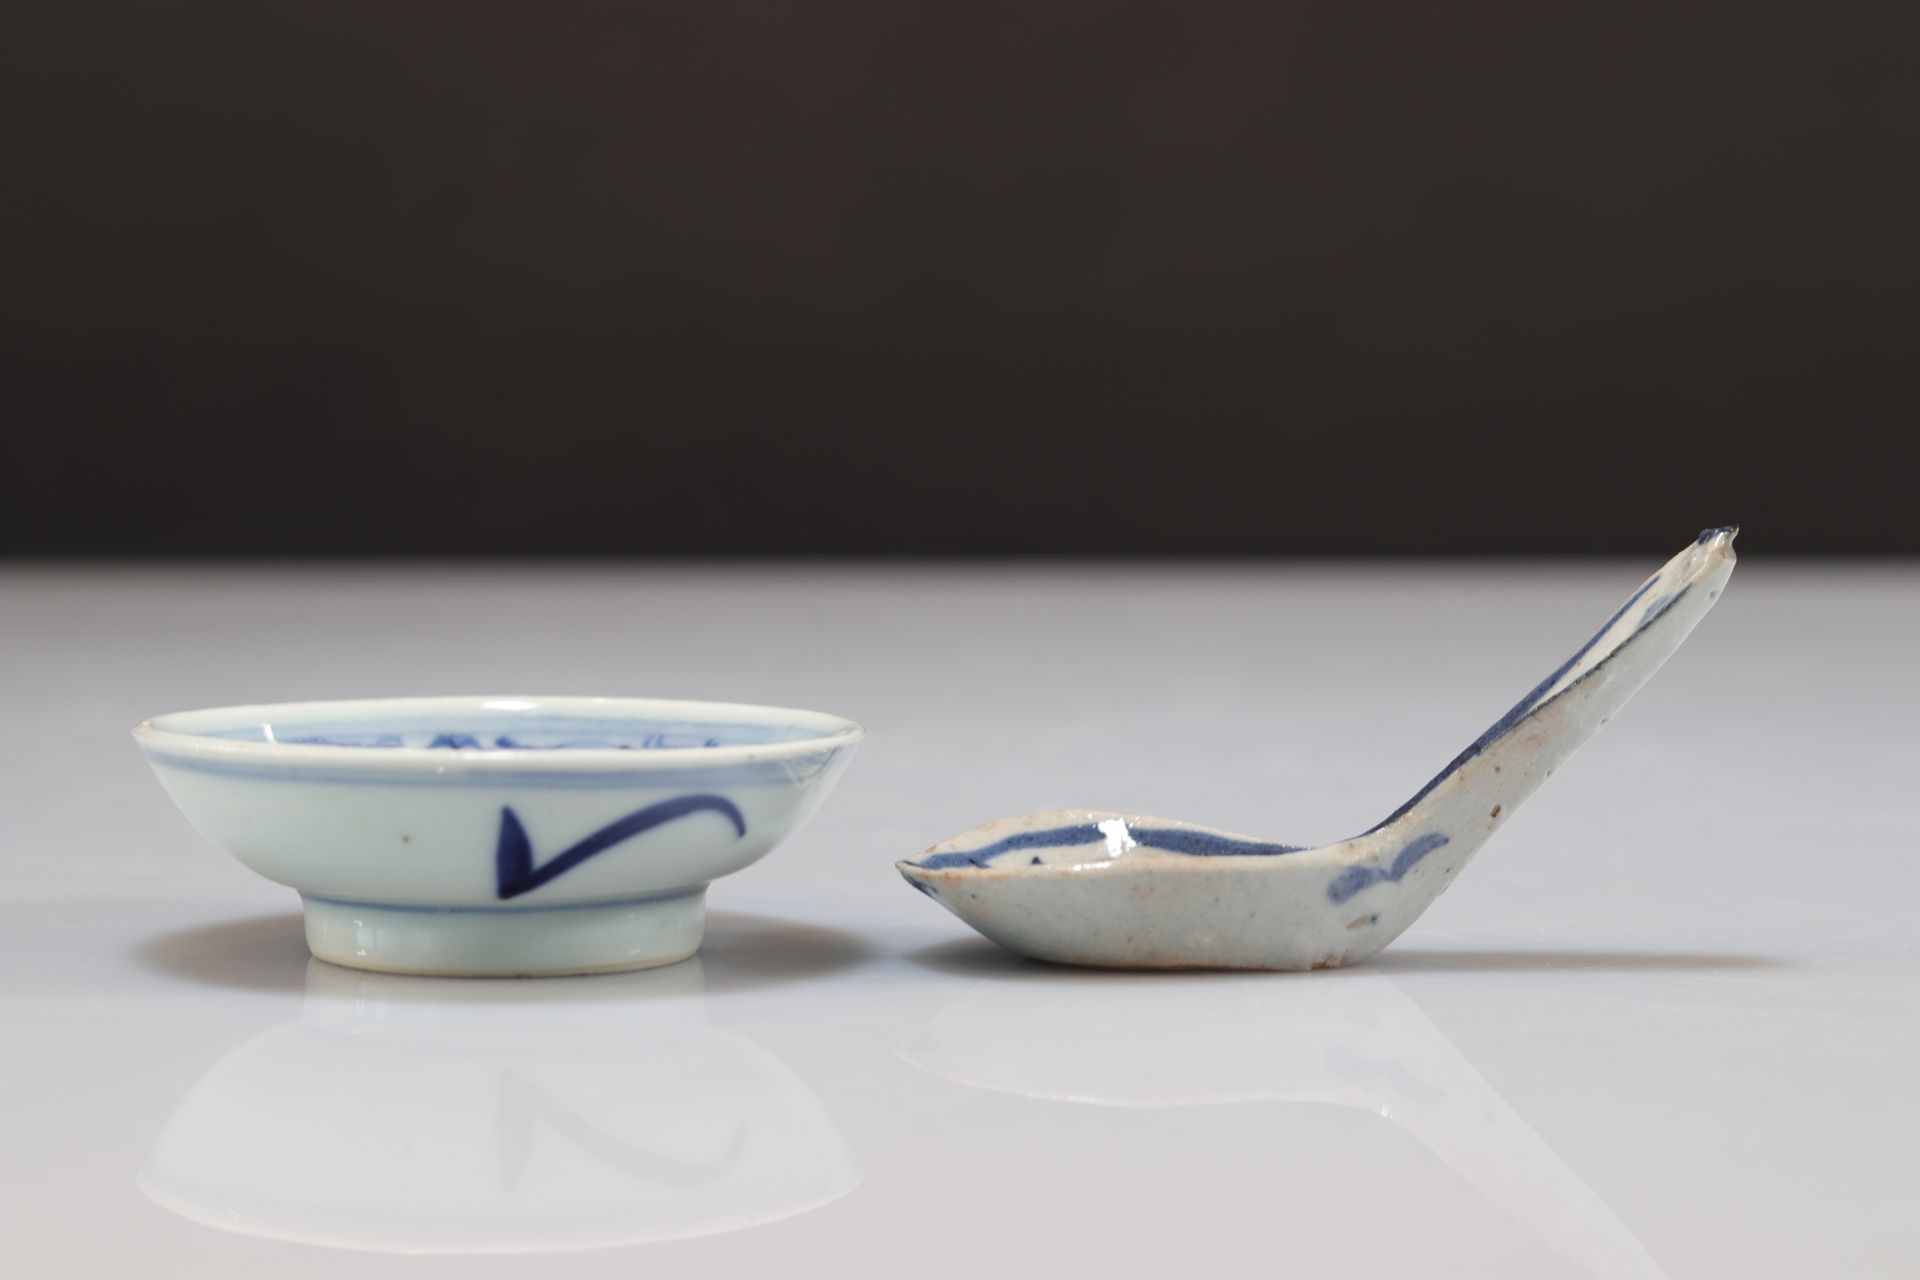 Blue white porcelain dish and spoon - Image 3 of 3